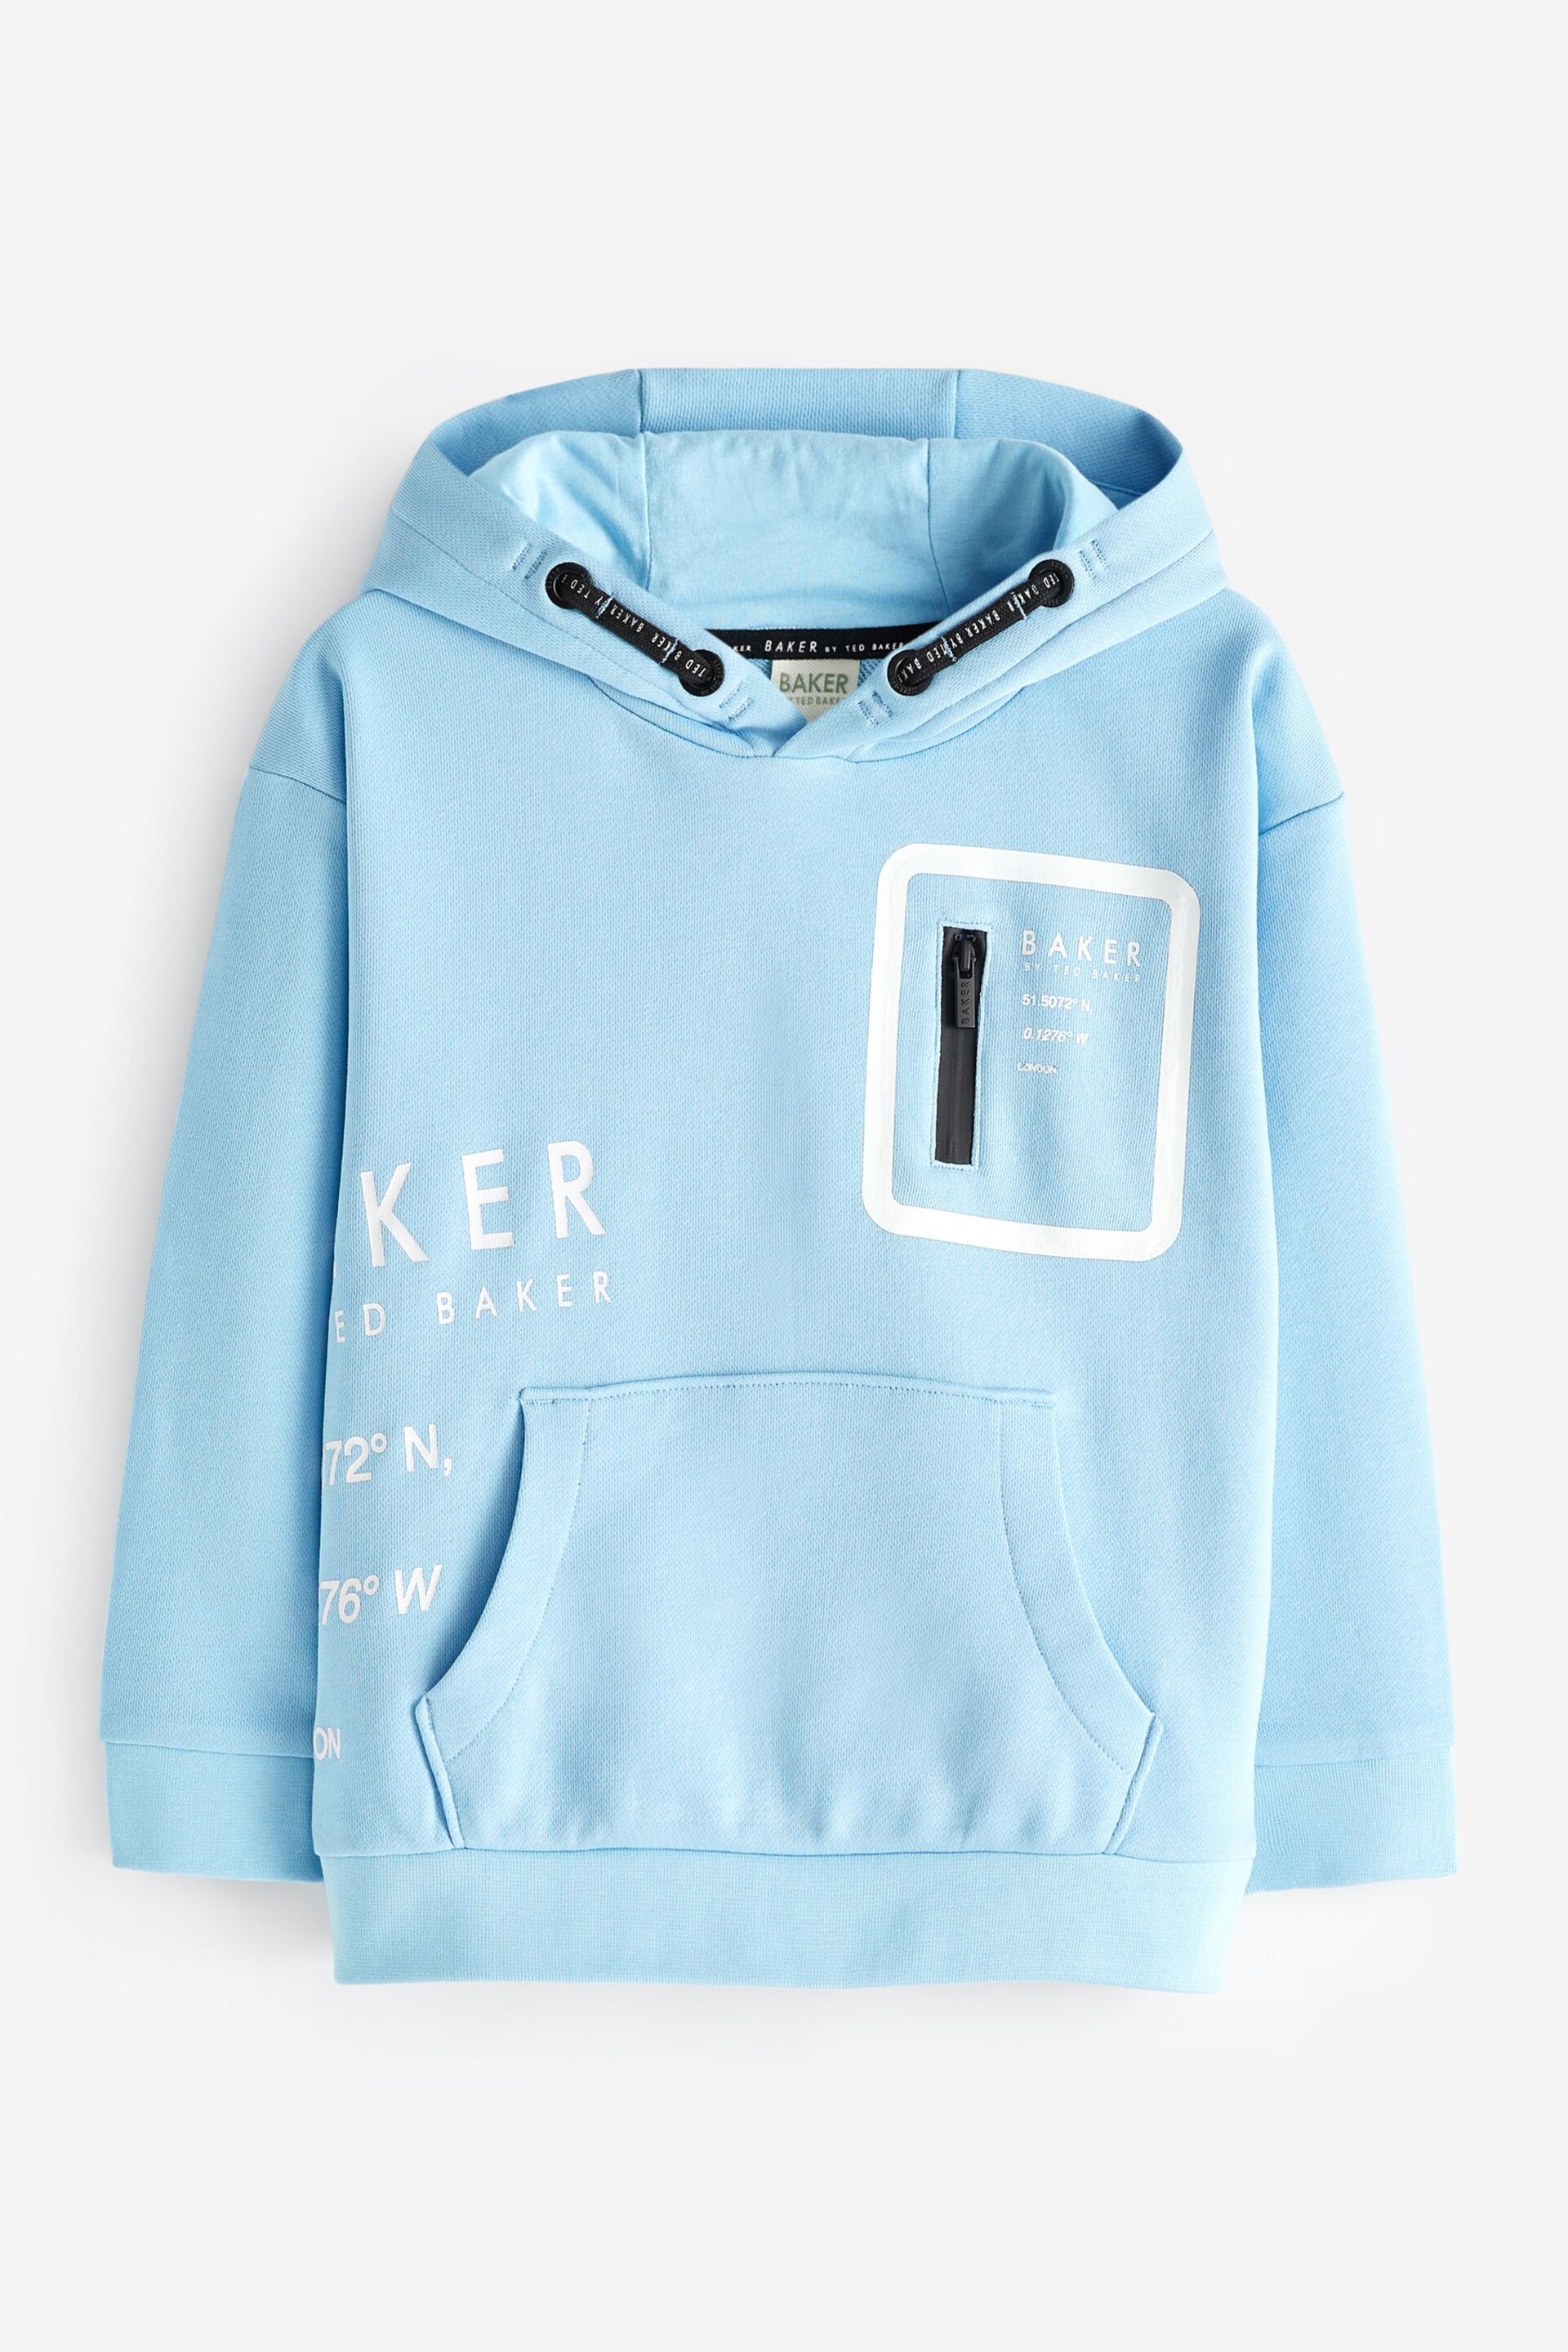 Baker by Ted Baker Graphic Hoodie - Image 7 of 9